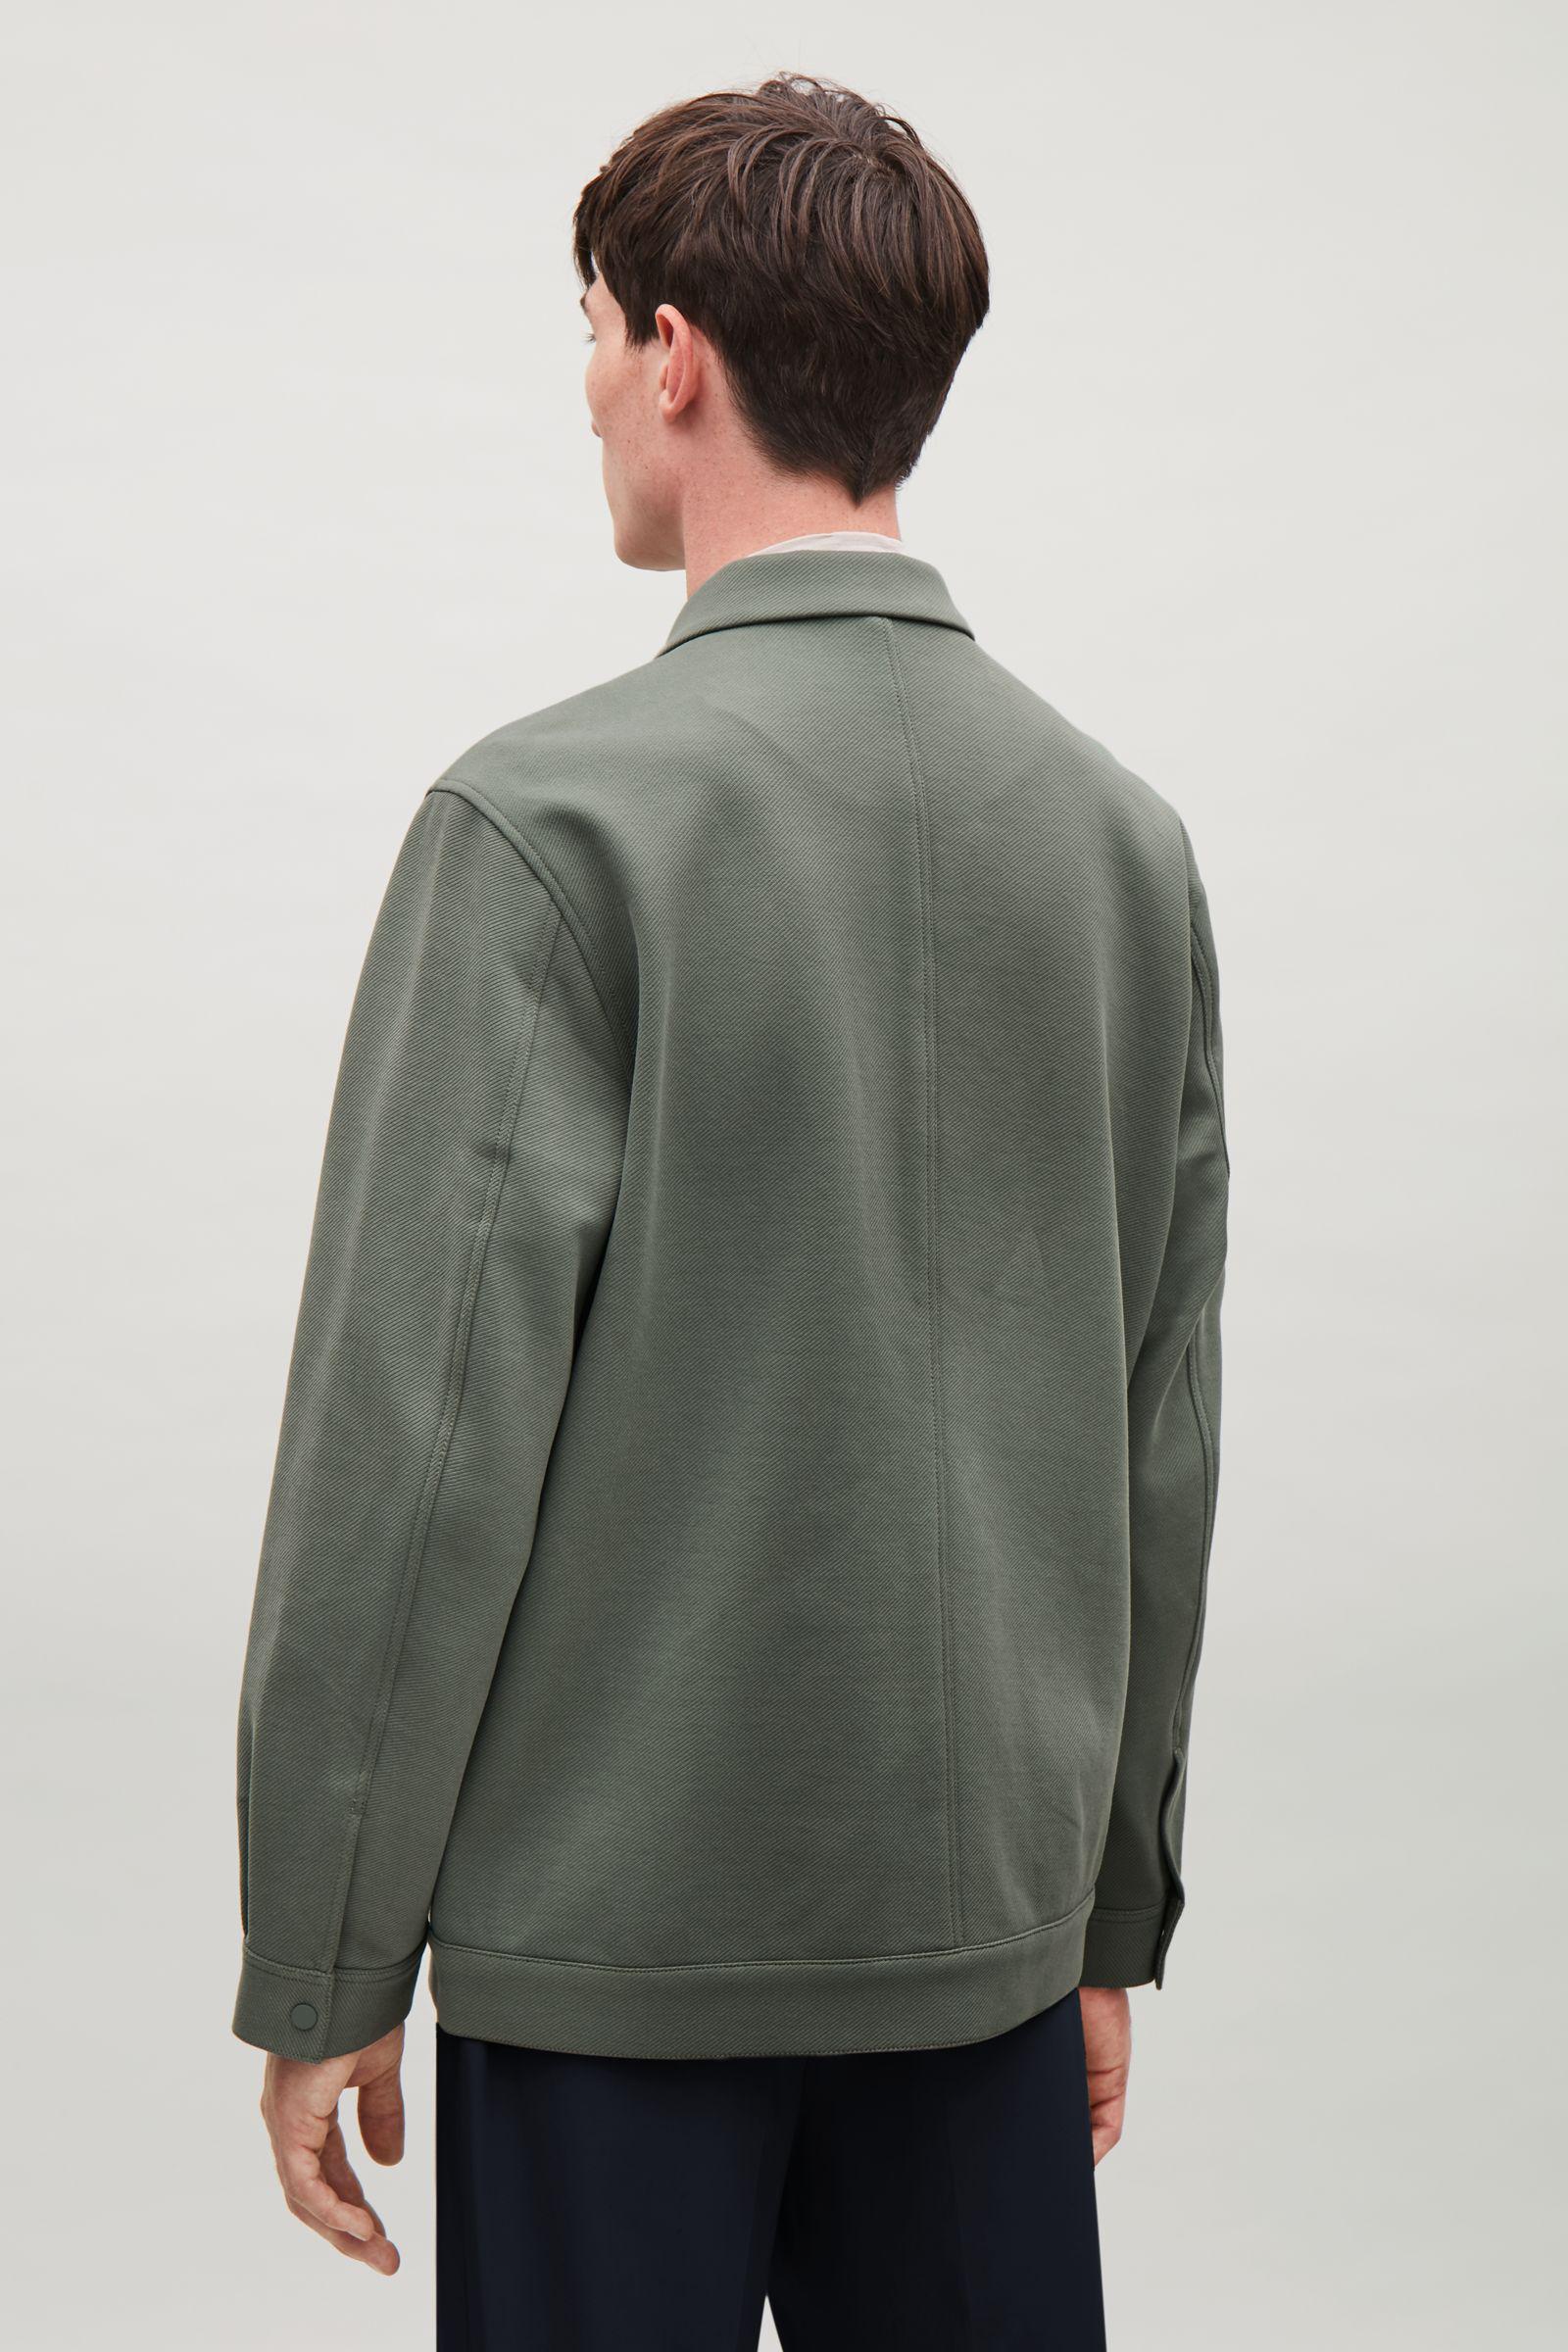 Lyst - COS Twill Shirt Jacket in Green for Men